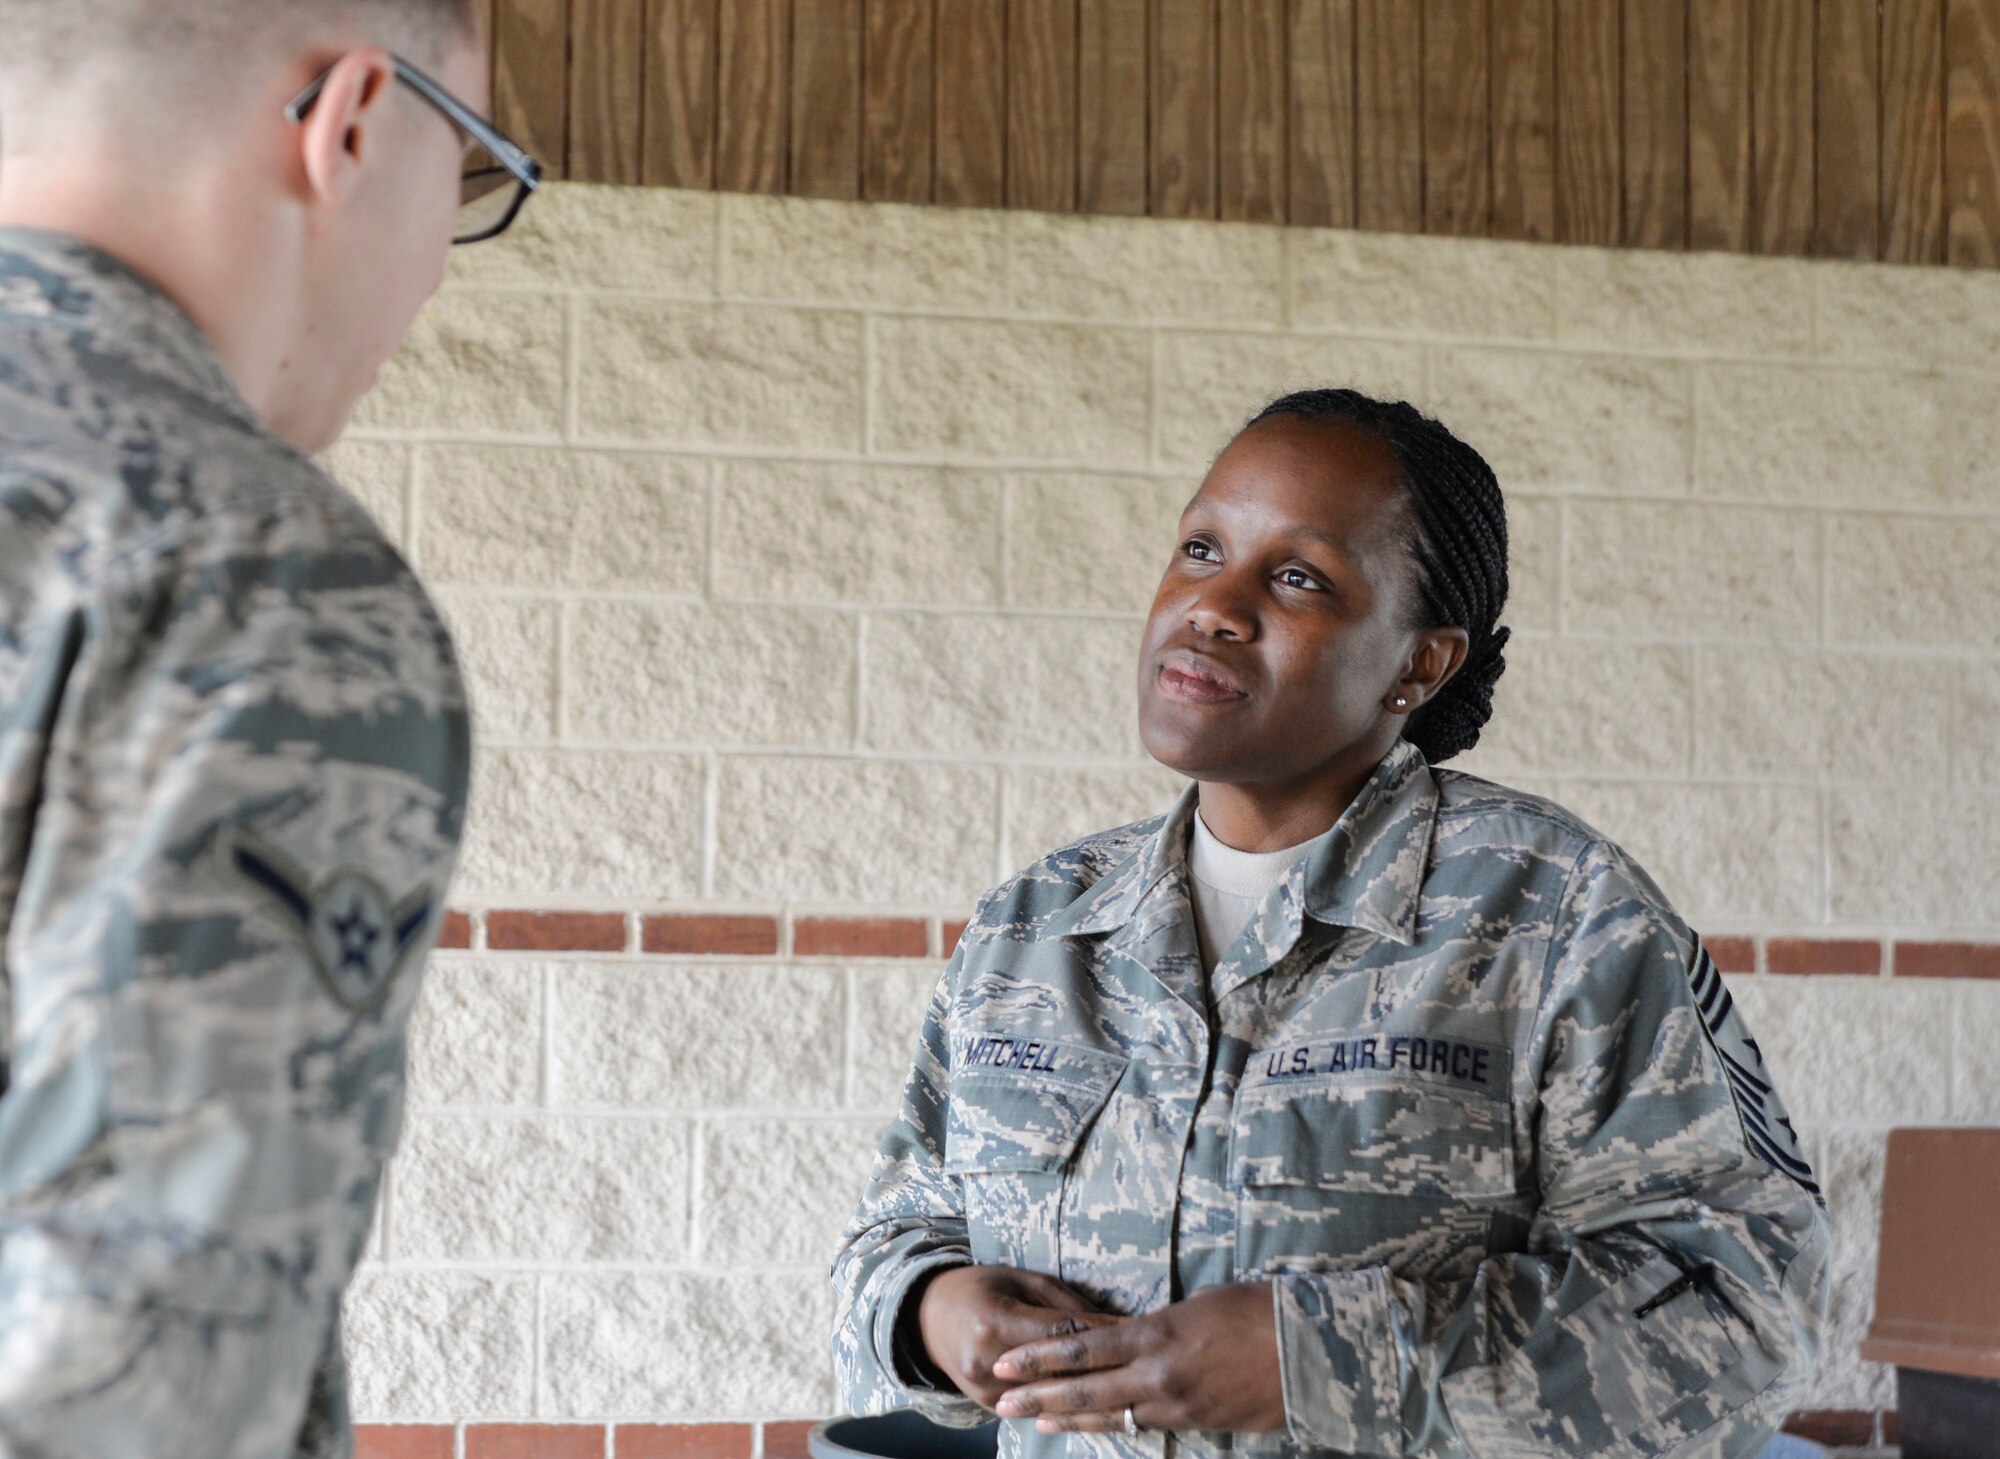 The Command Chief talks with Airmen and pre-basic training Airmen during a mentorship luncheon here March 24, 2019.